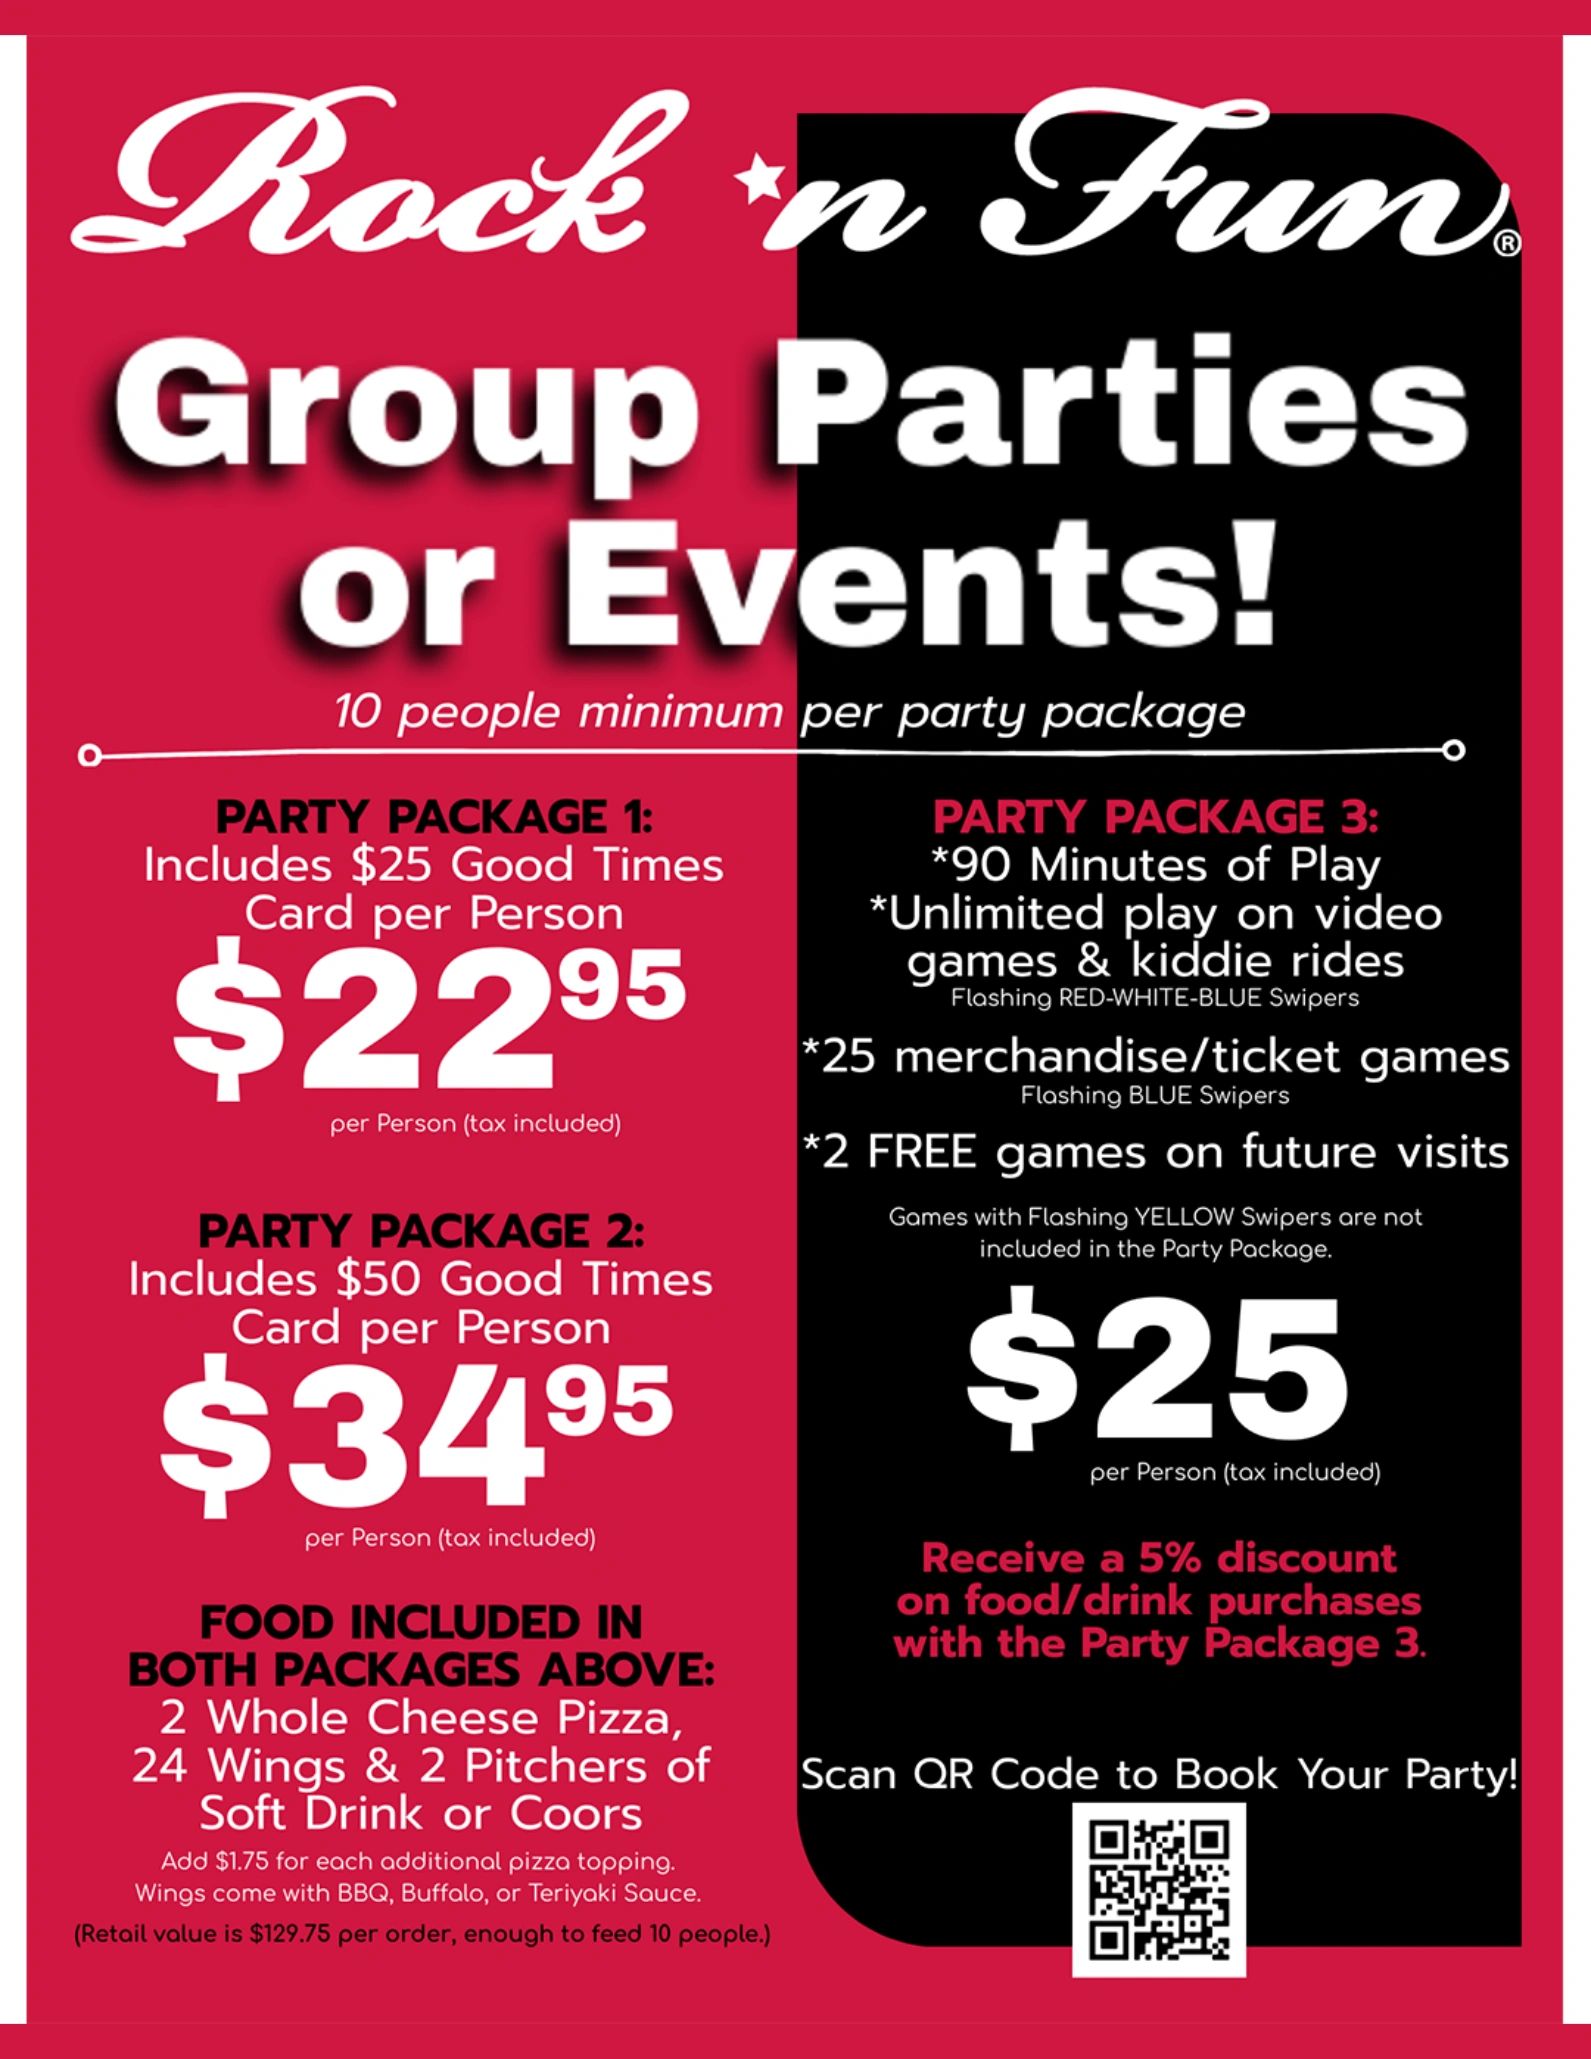 Rock n group parties poster on the display